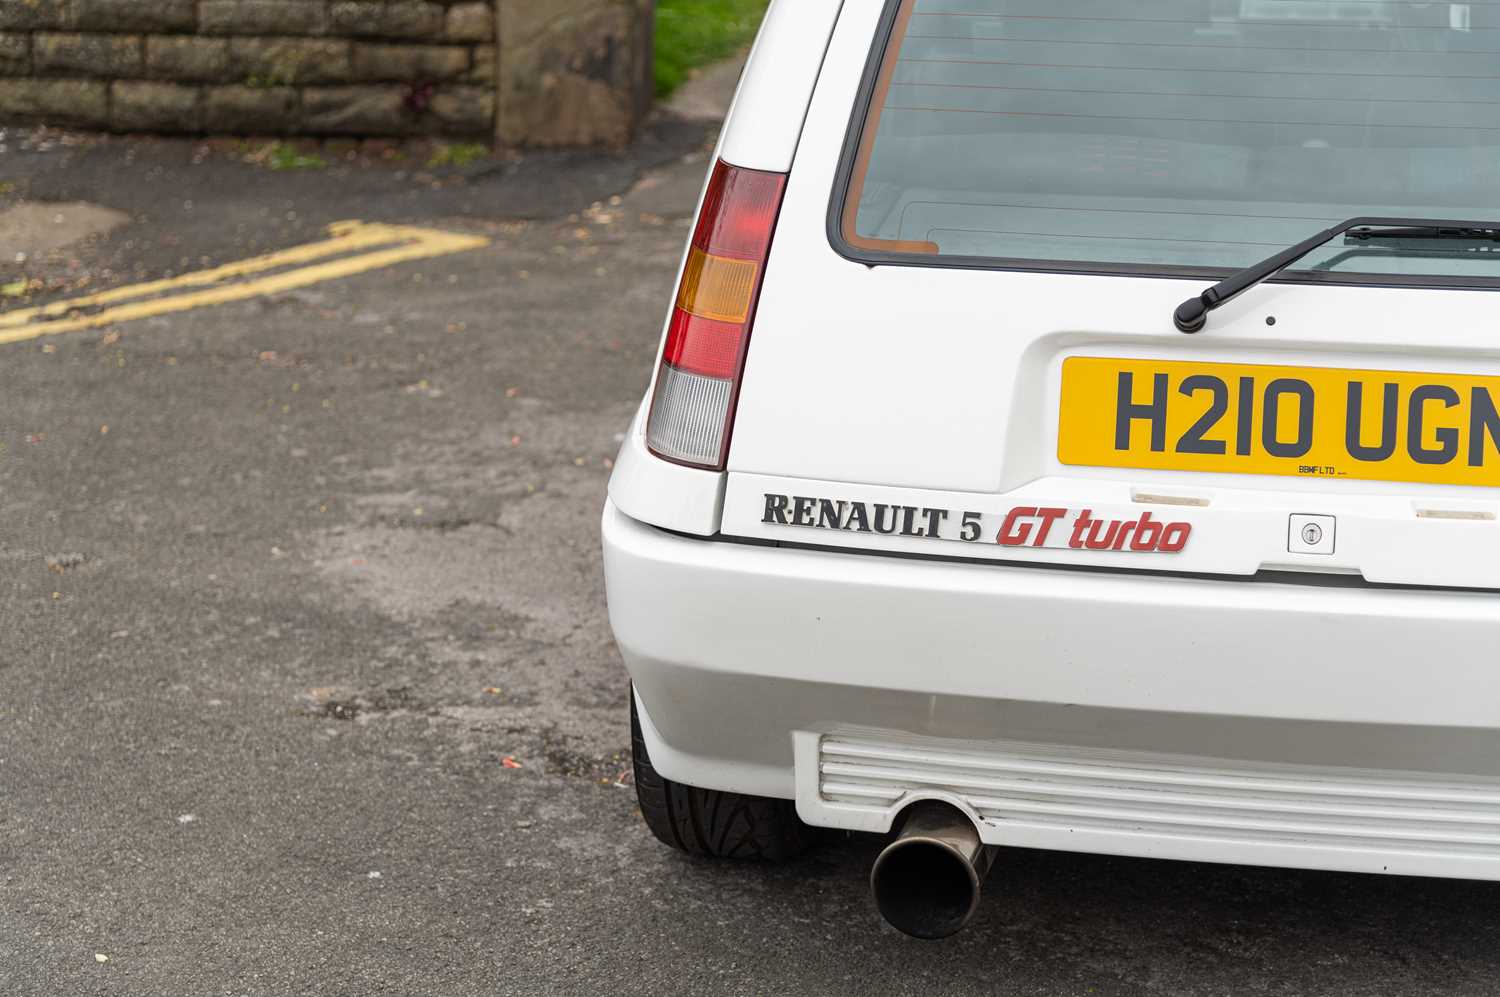 1990 Renault 5 GT Turbo - Image 16 of 79